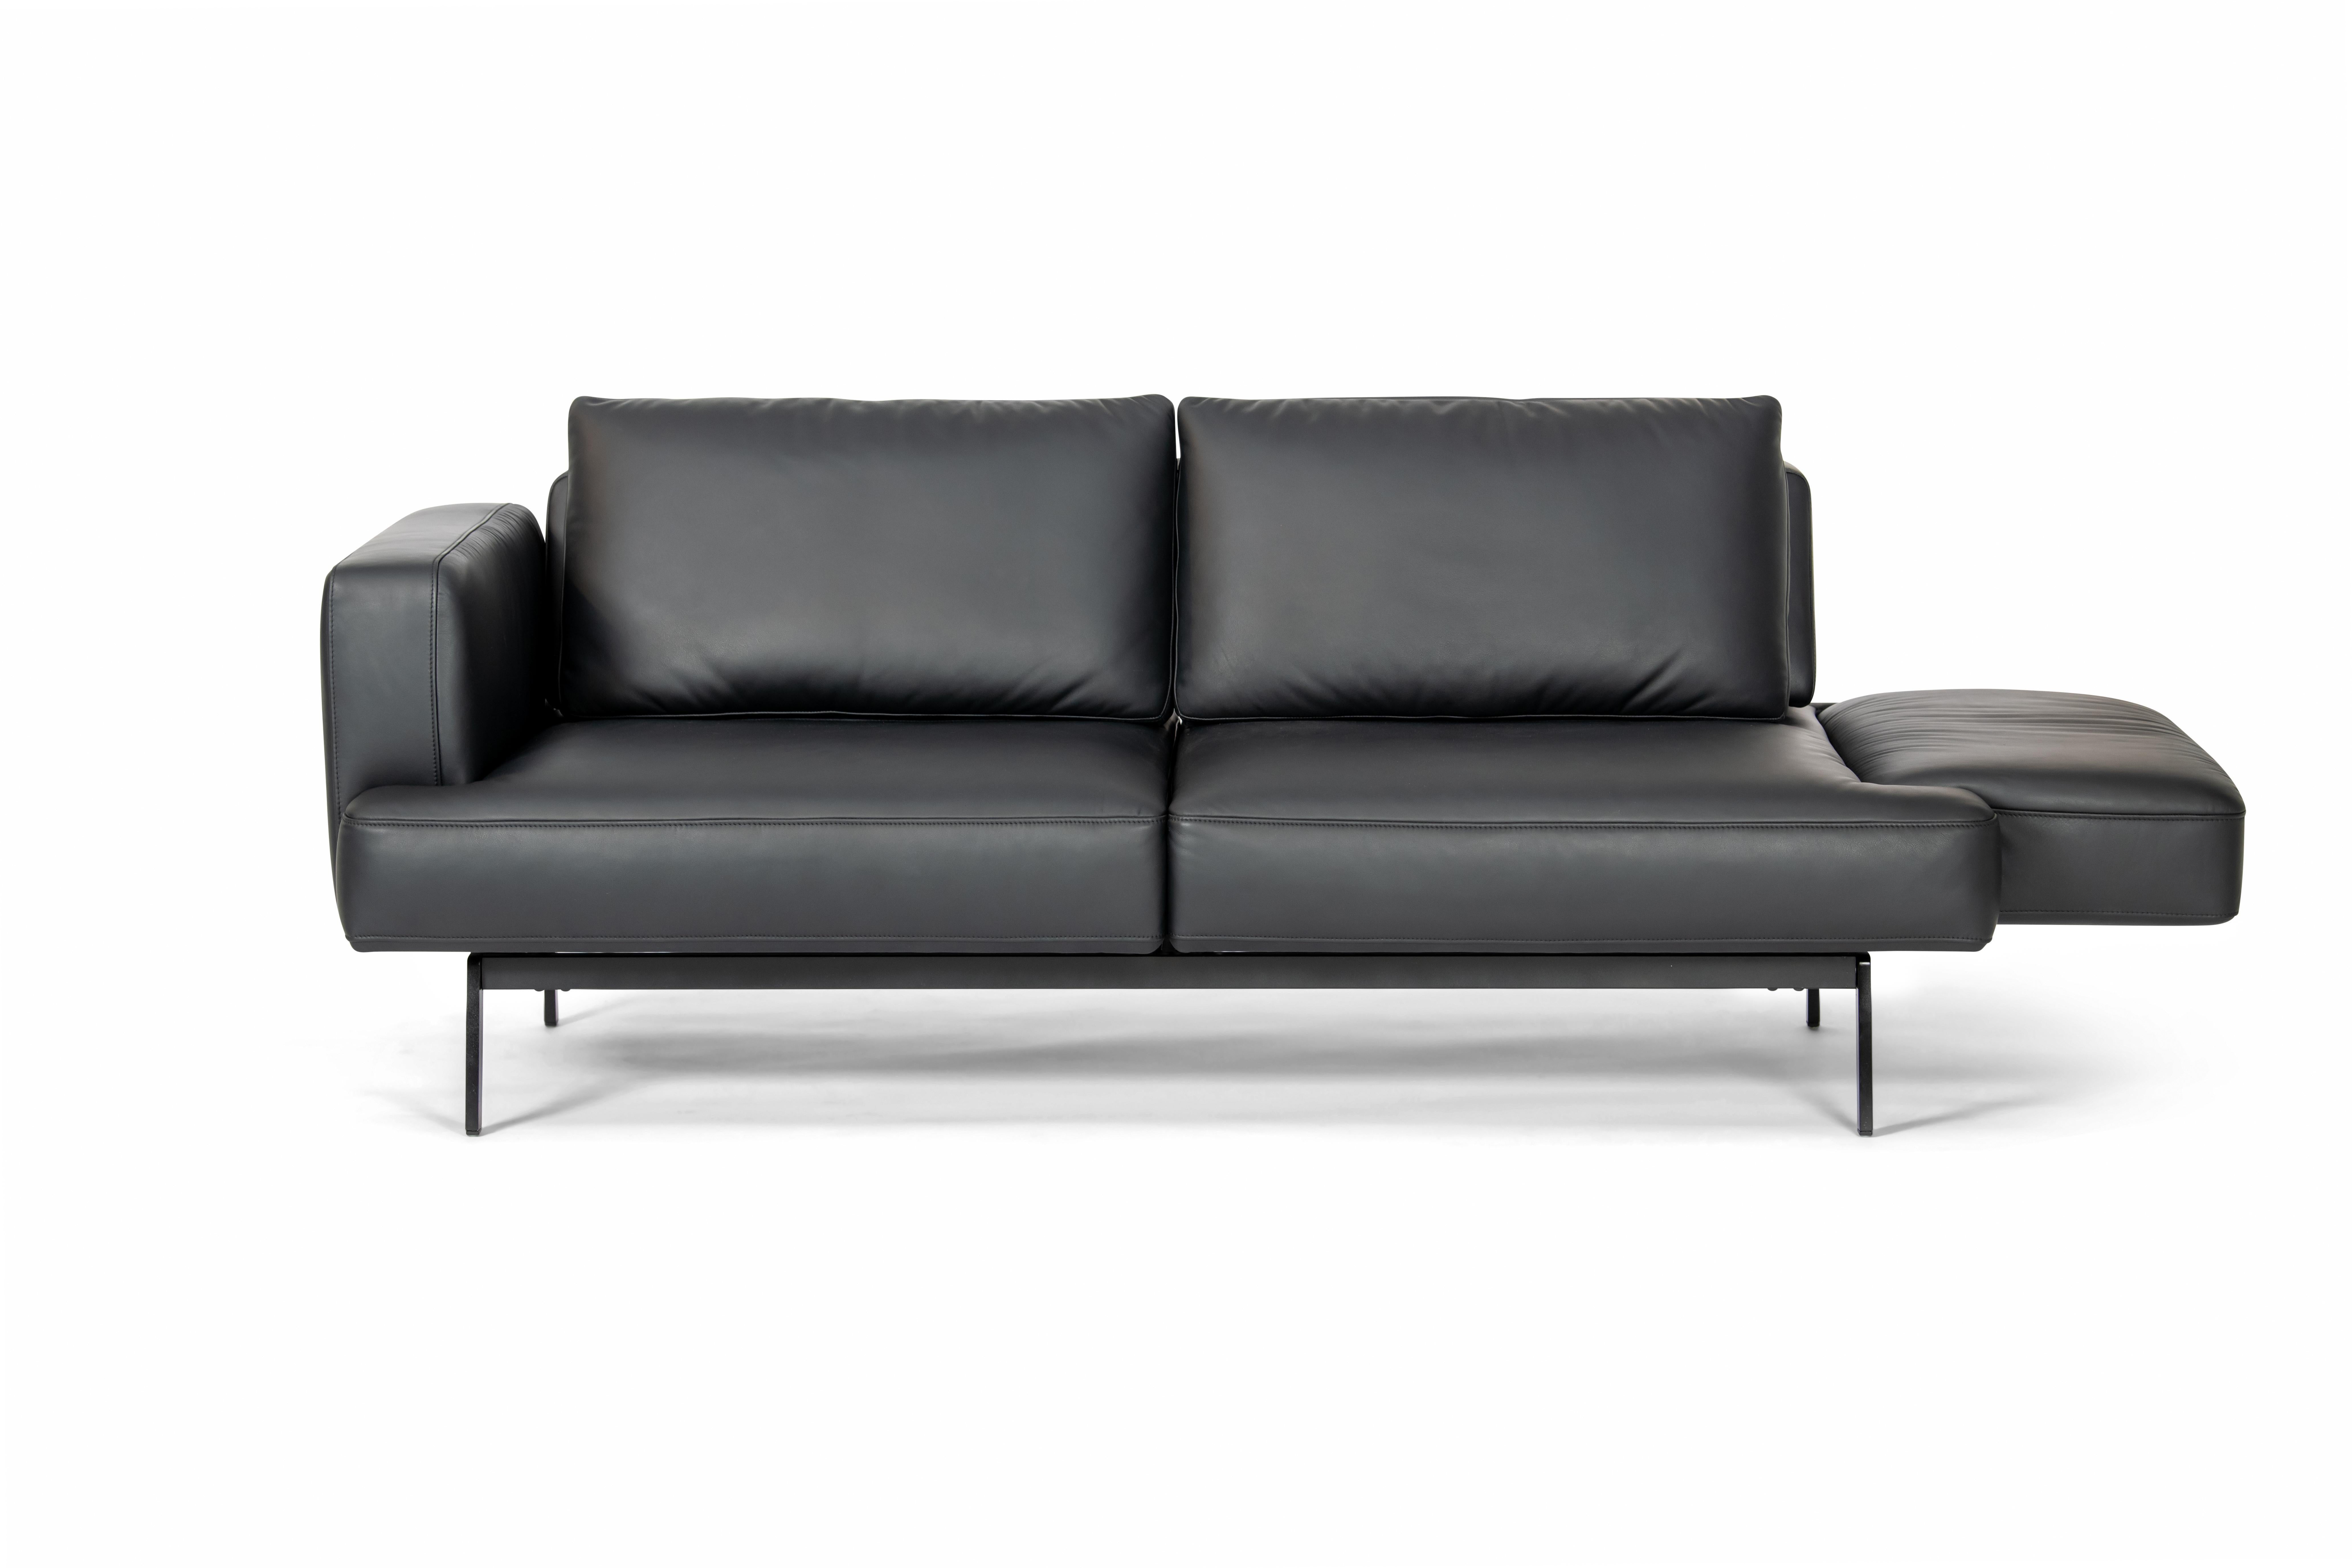 DeSede Ds-747/04 Multifunctional Sofa in Black Leather Seat and Back Upholstery For Sale 3